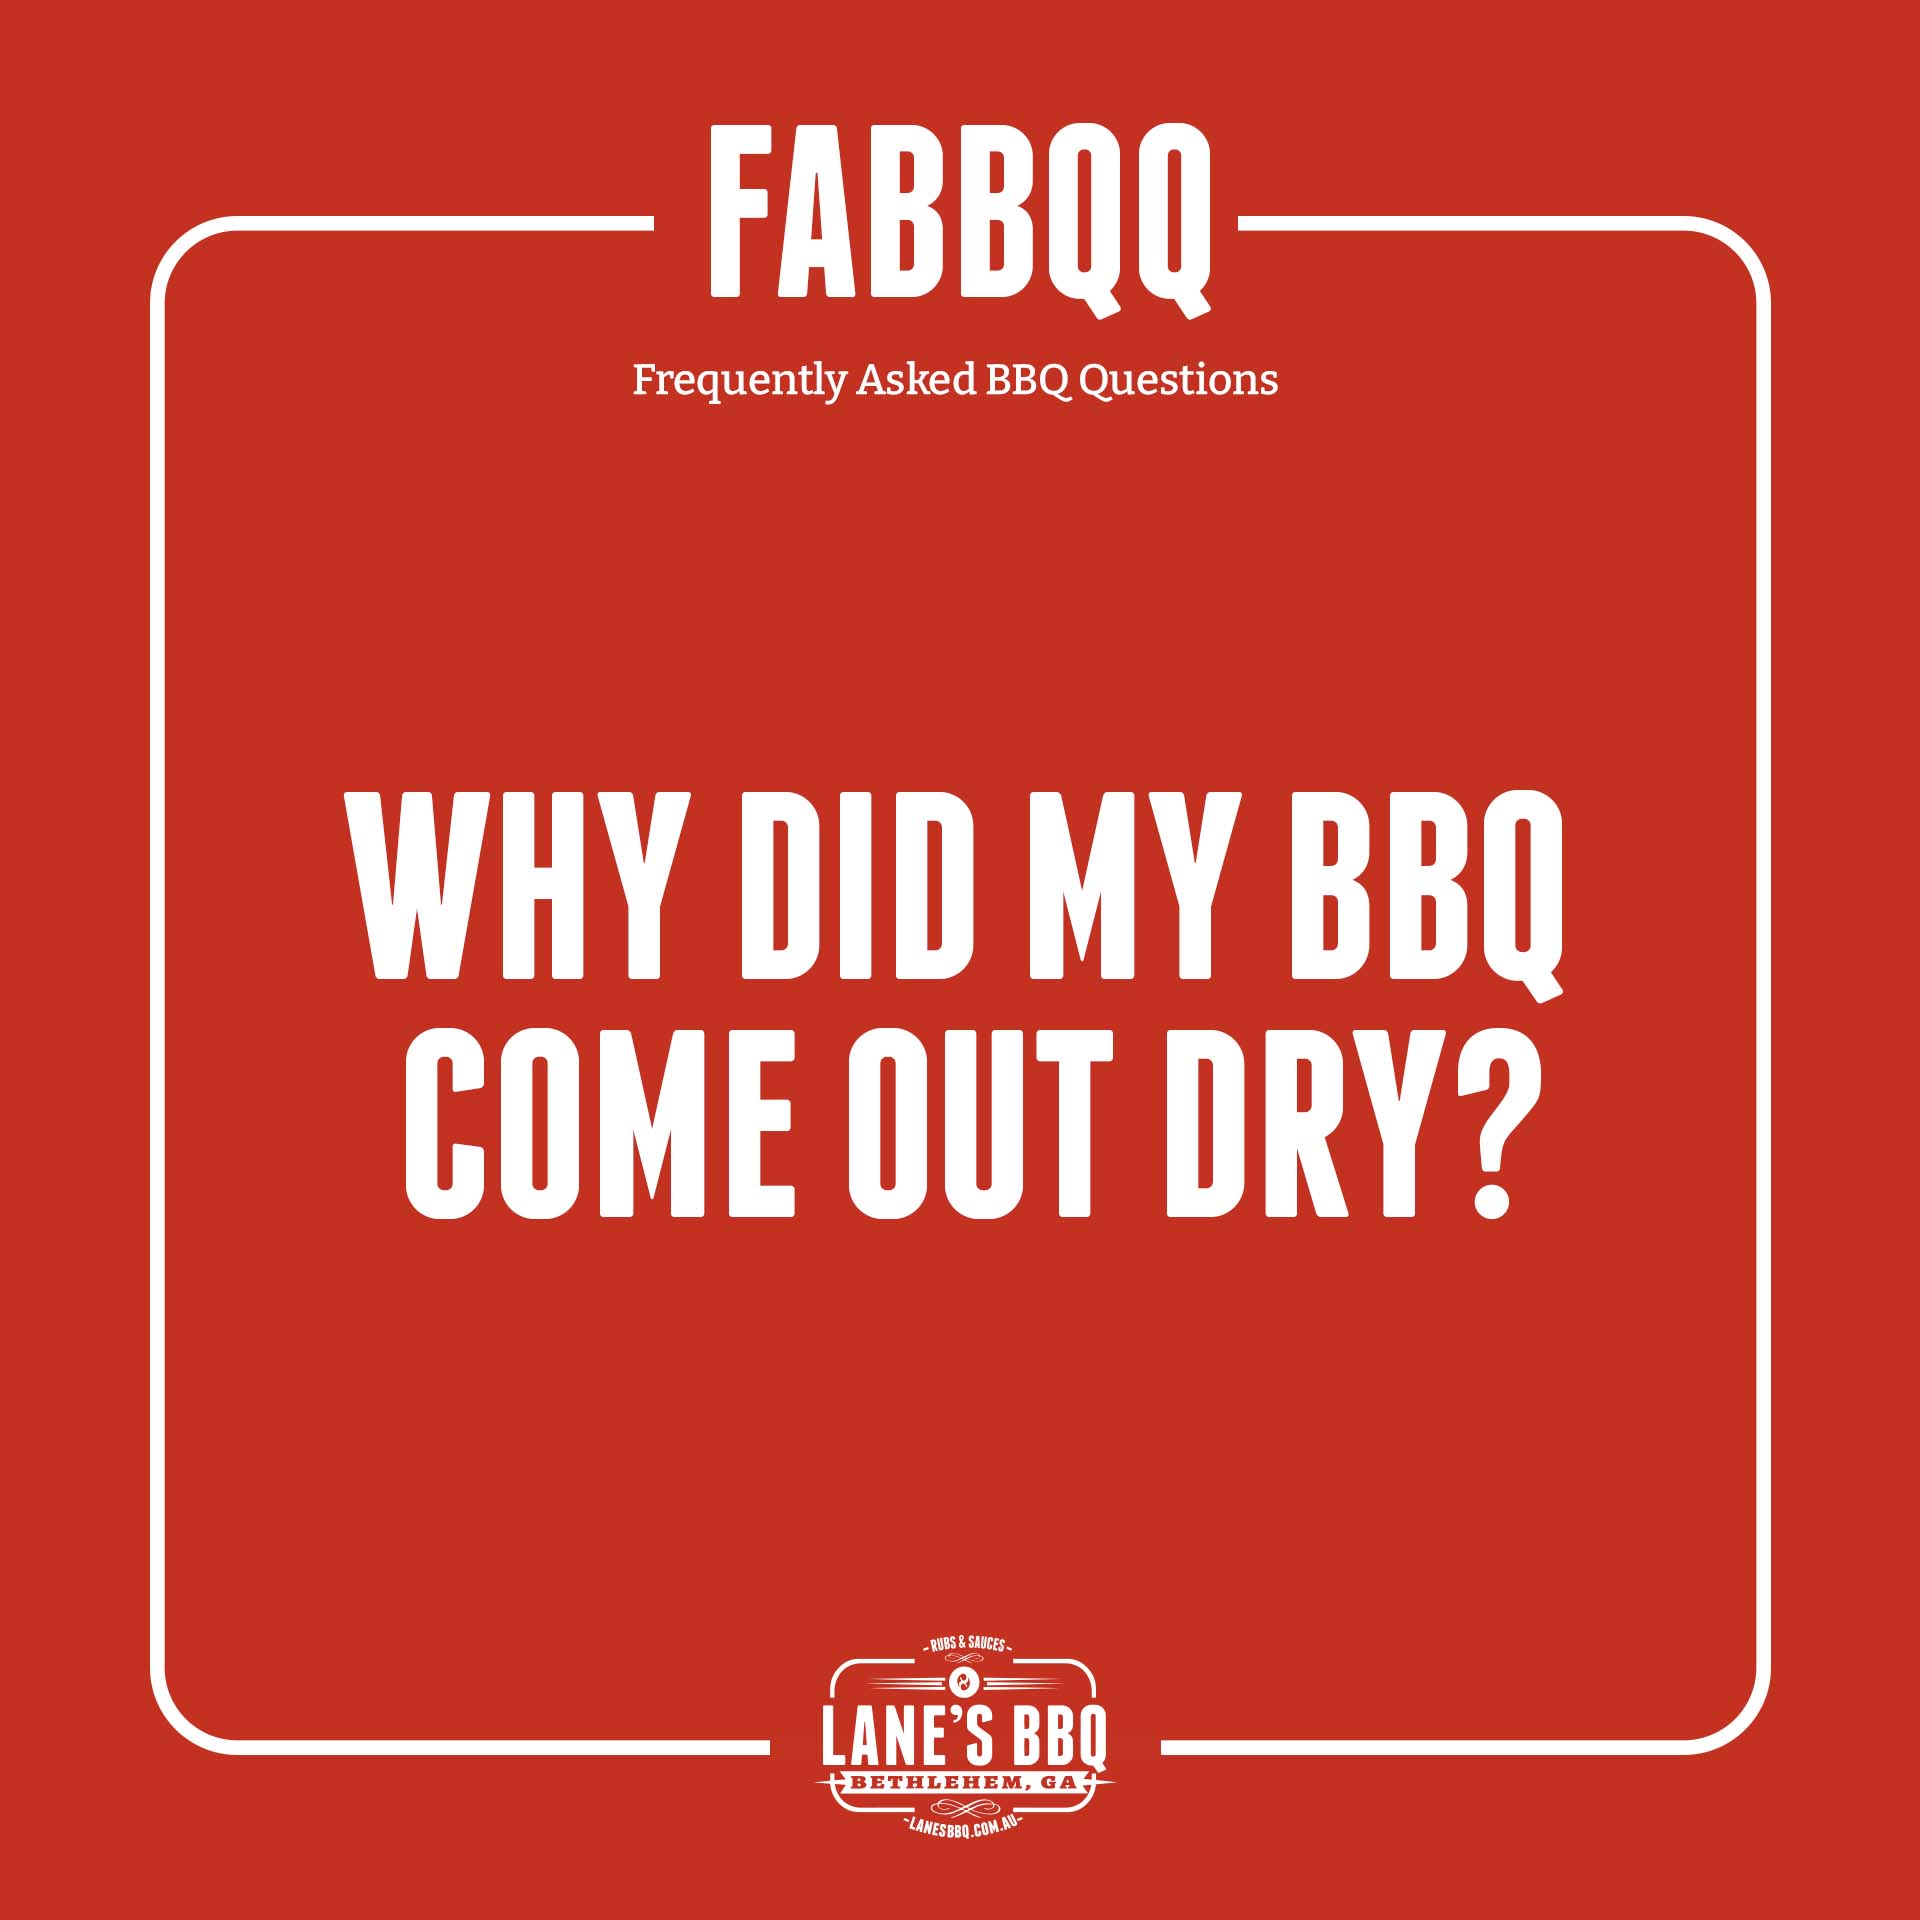 FABBQQ – Why Did My BBQ Come Out Dry?